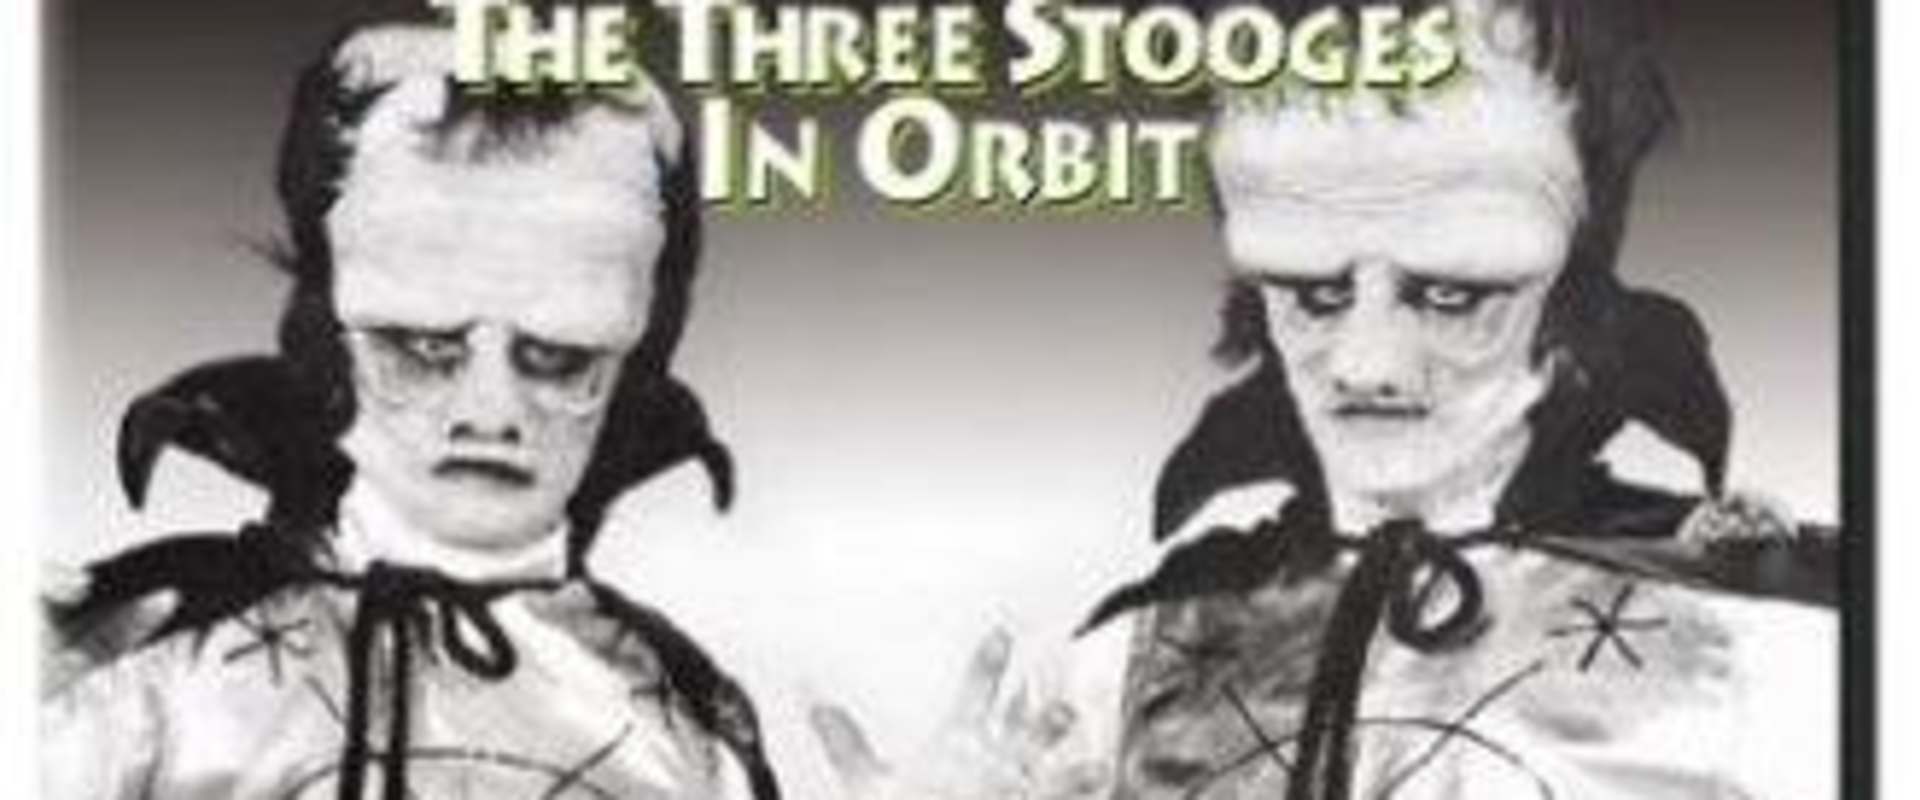 The Three Stooges in Orbit background 2